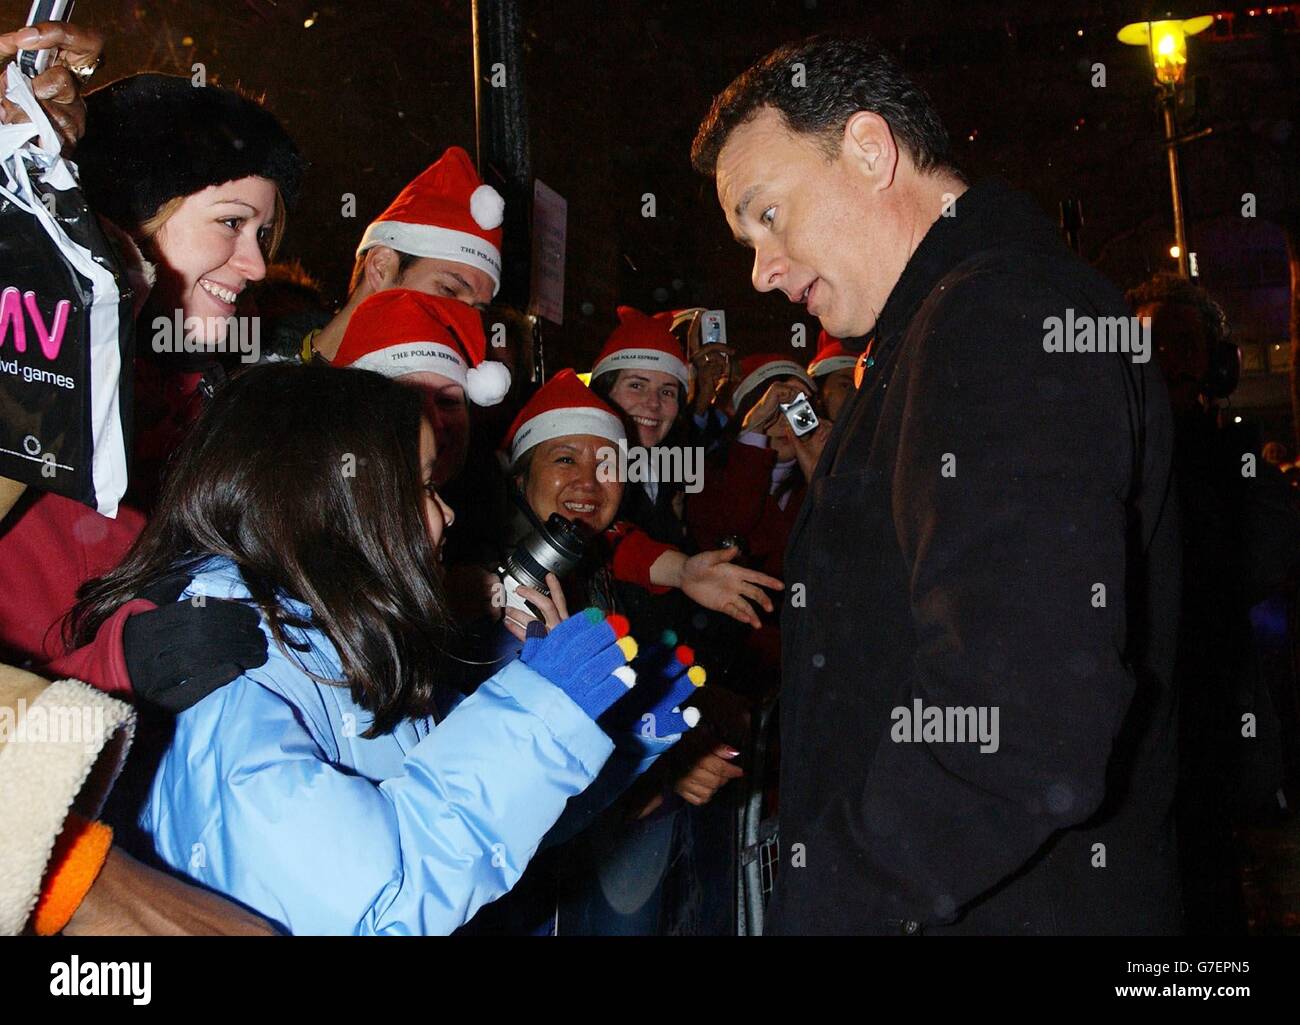 Actor Tom Hanks greets fans as he arrives for the UK premiere of his latest film The Polar Express, at the Vue Leicester Square in central London. Stock Photo